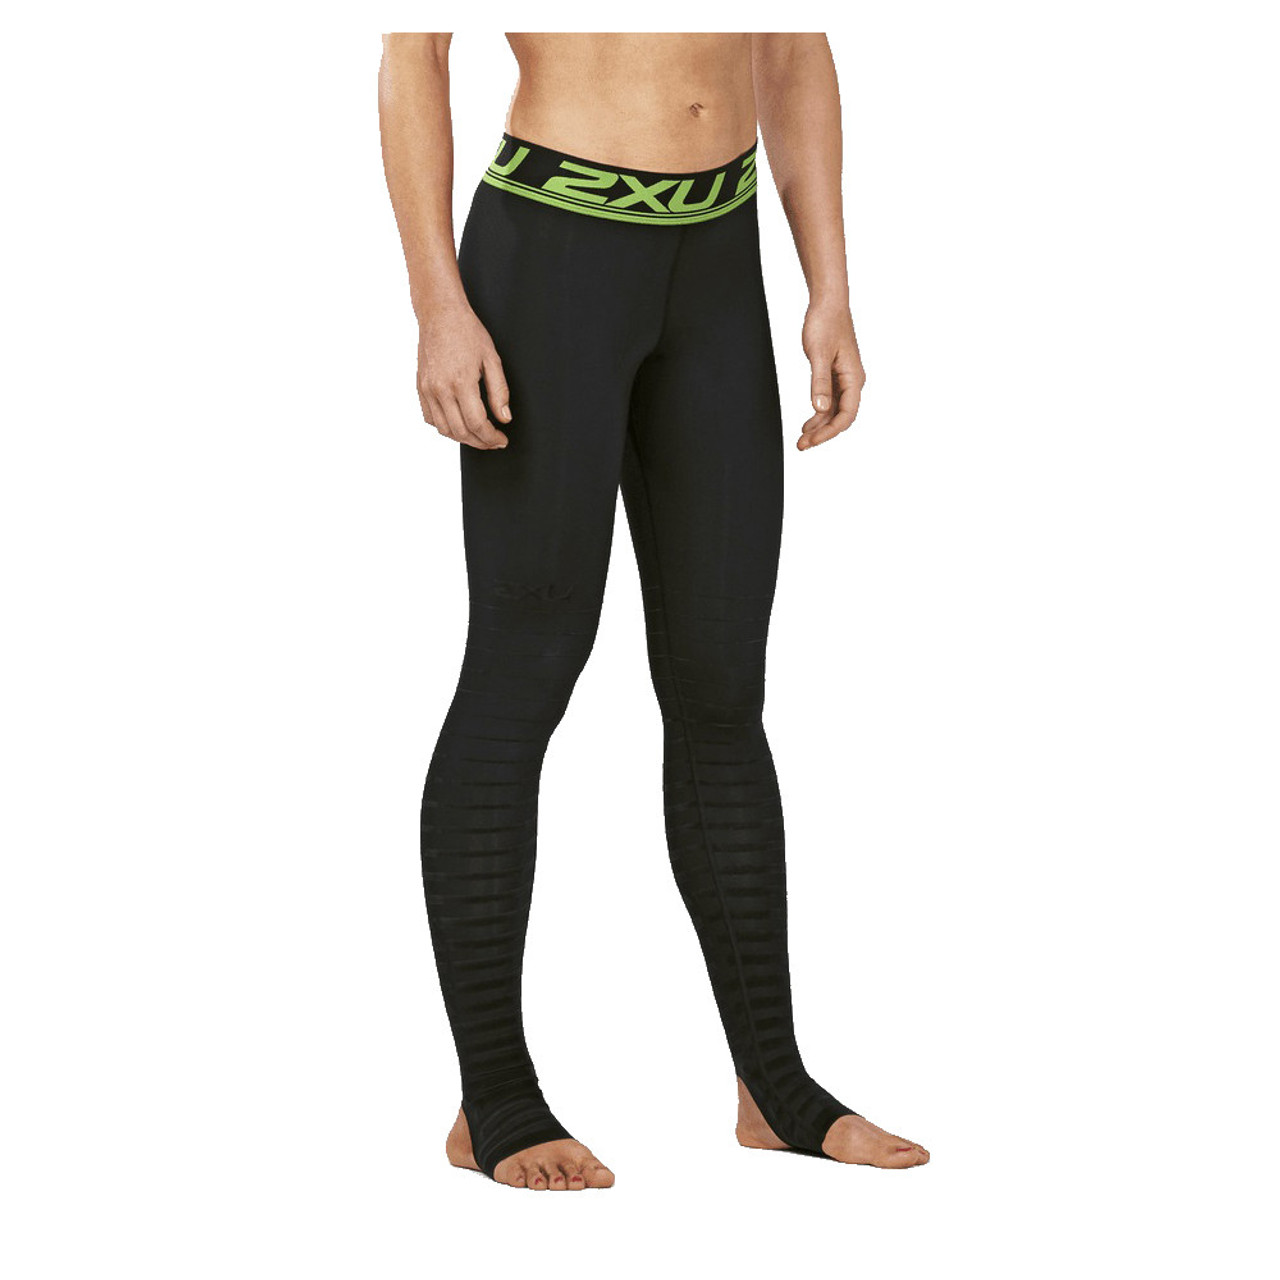 Women's Power Recovery Compression